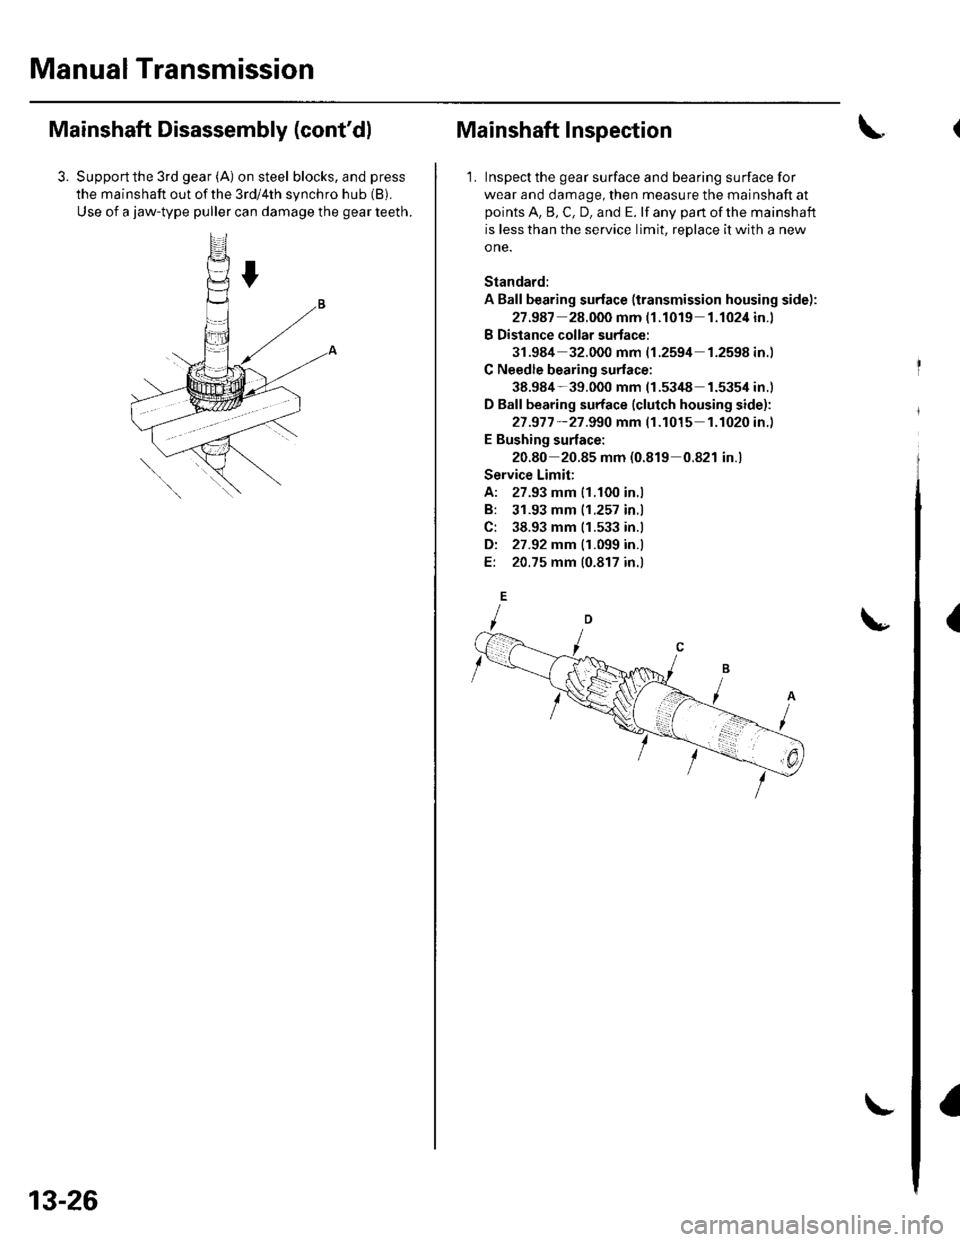 HONDA CIVIC 2003 7.G Workshop Manual Manual Transmission
Mainshaft Disassembly (contdl
3. Supportthe 3rd gear (A) on steel blocks, and press
the mainshaft out of the 3rd/4th synchro hub (B).
Use of a jaw-type puller can damage the gear 